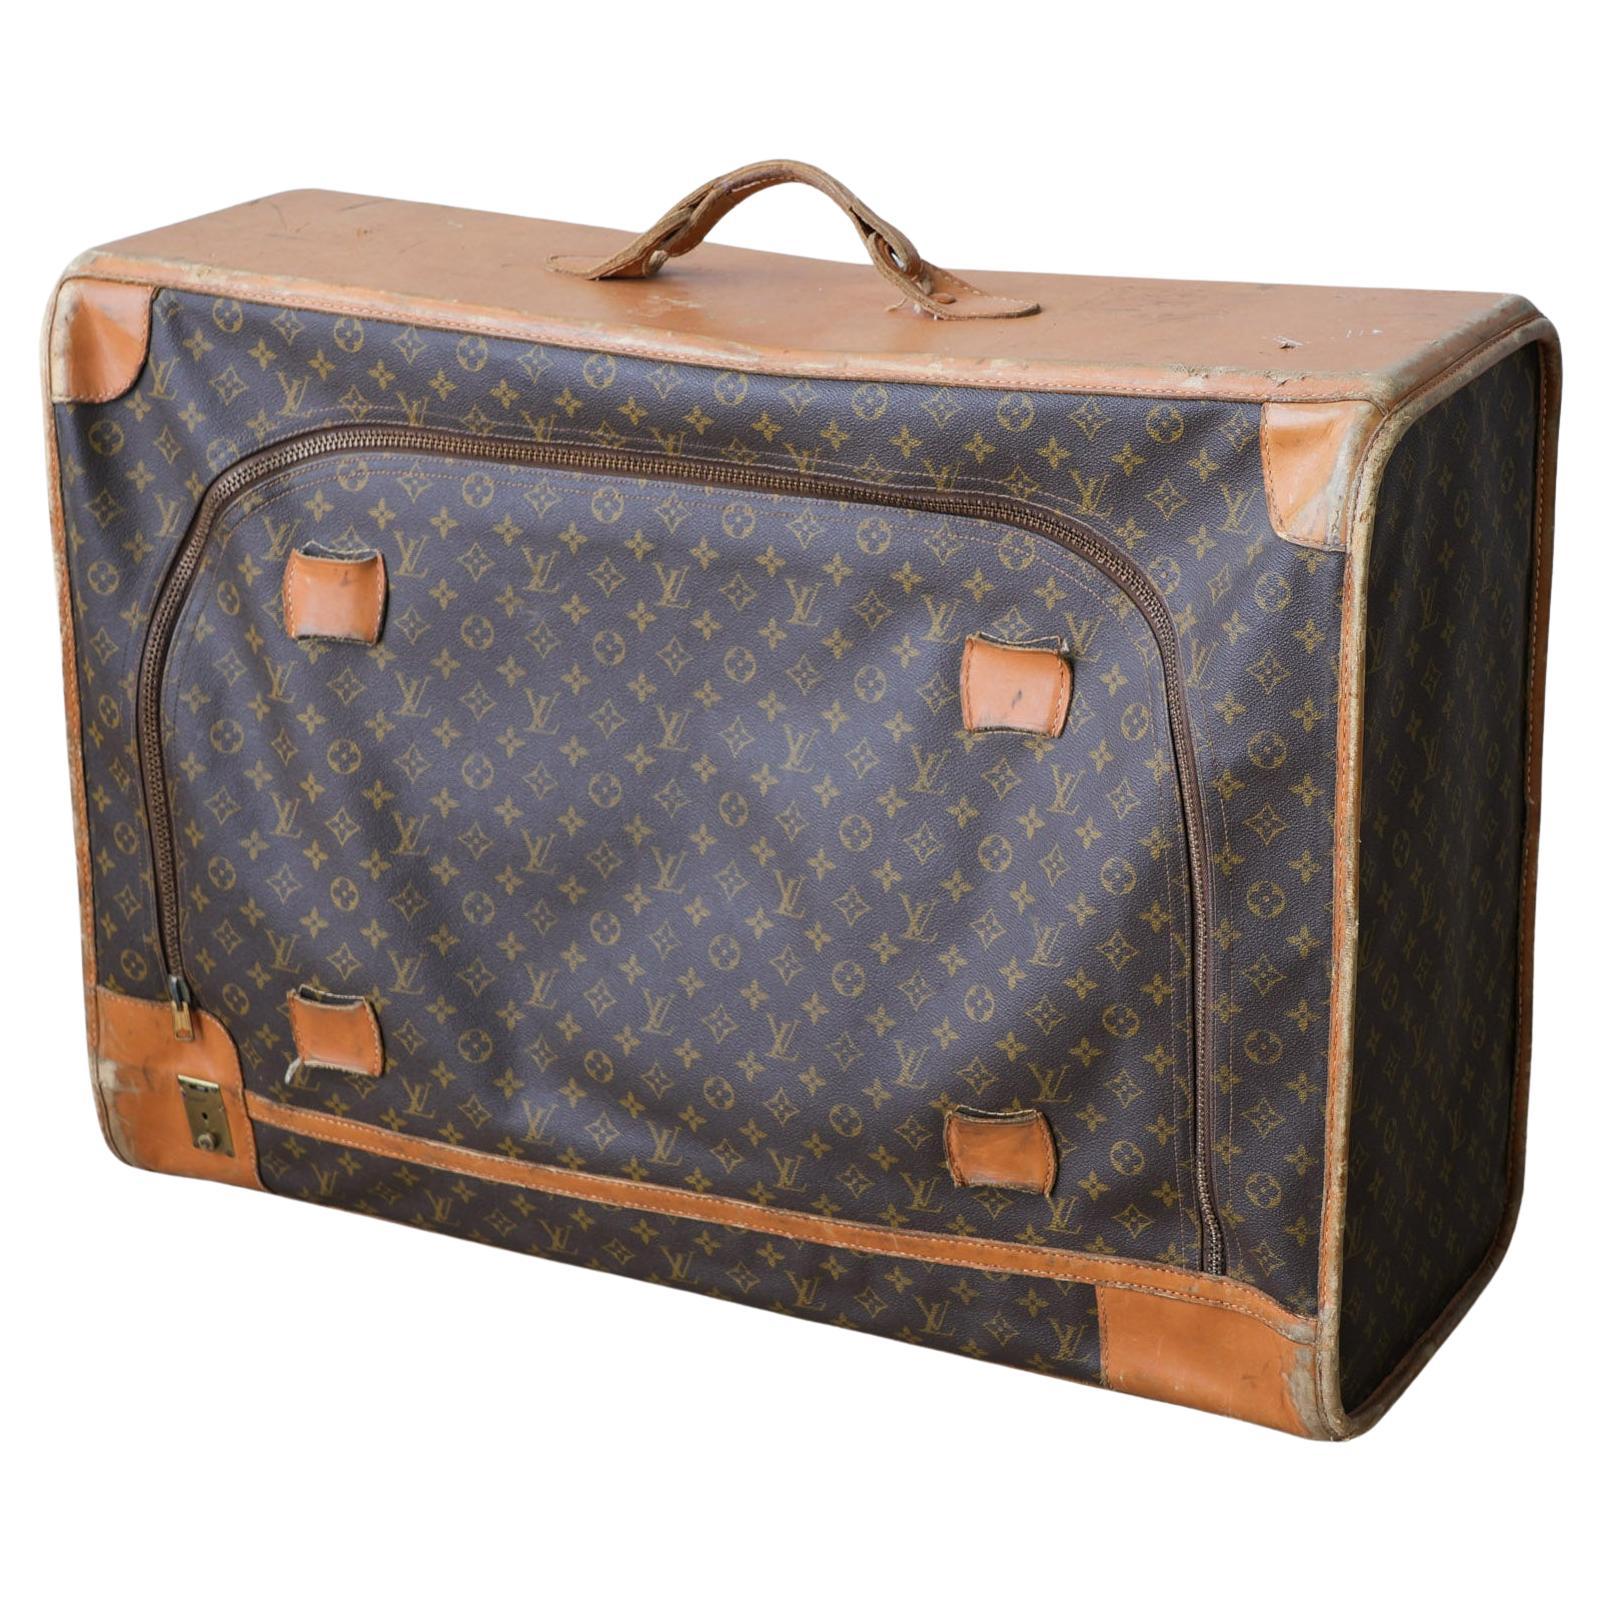 Original vintage Louis Vuitton suitcase, from the 1970s For Sale